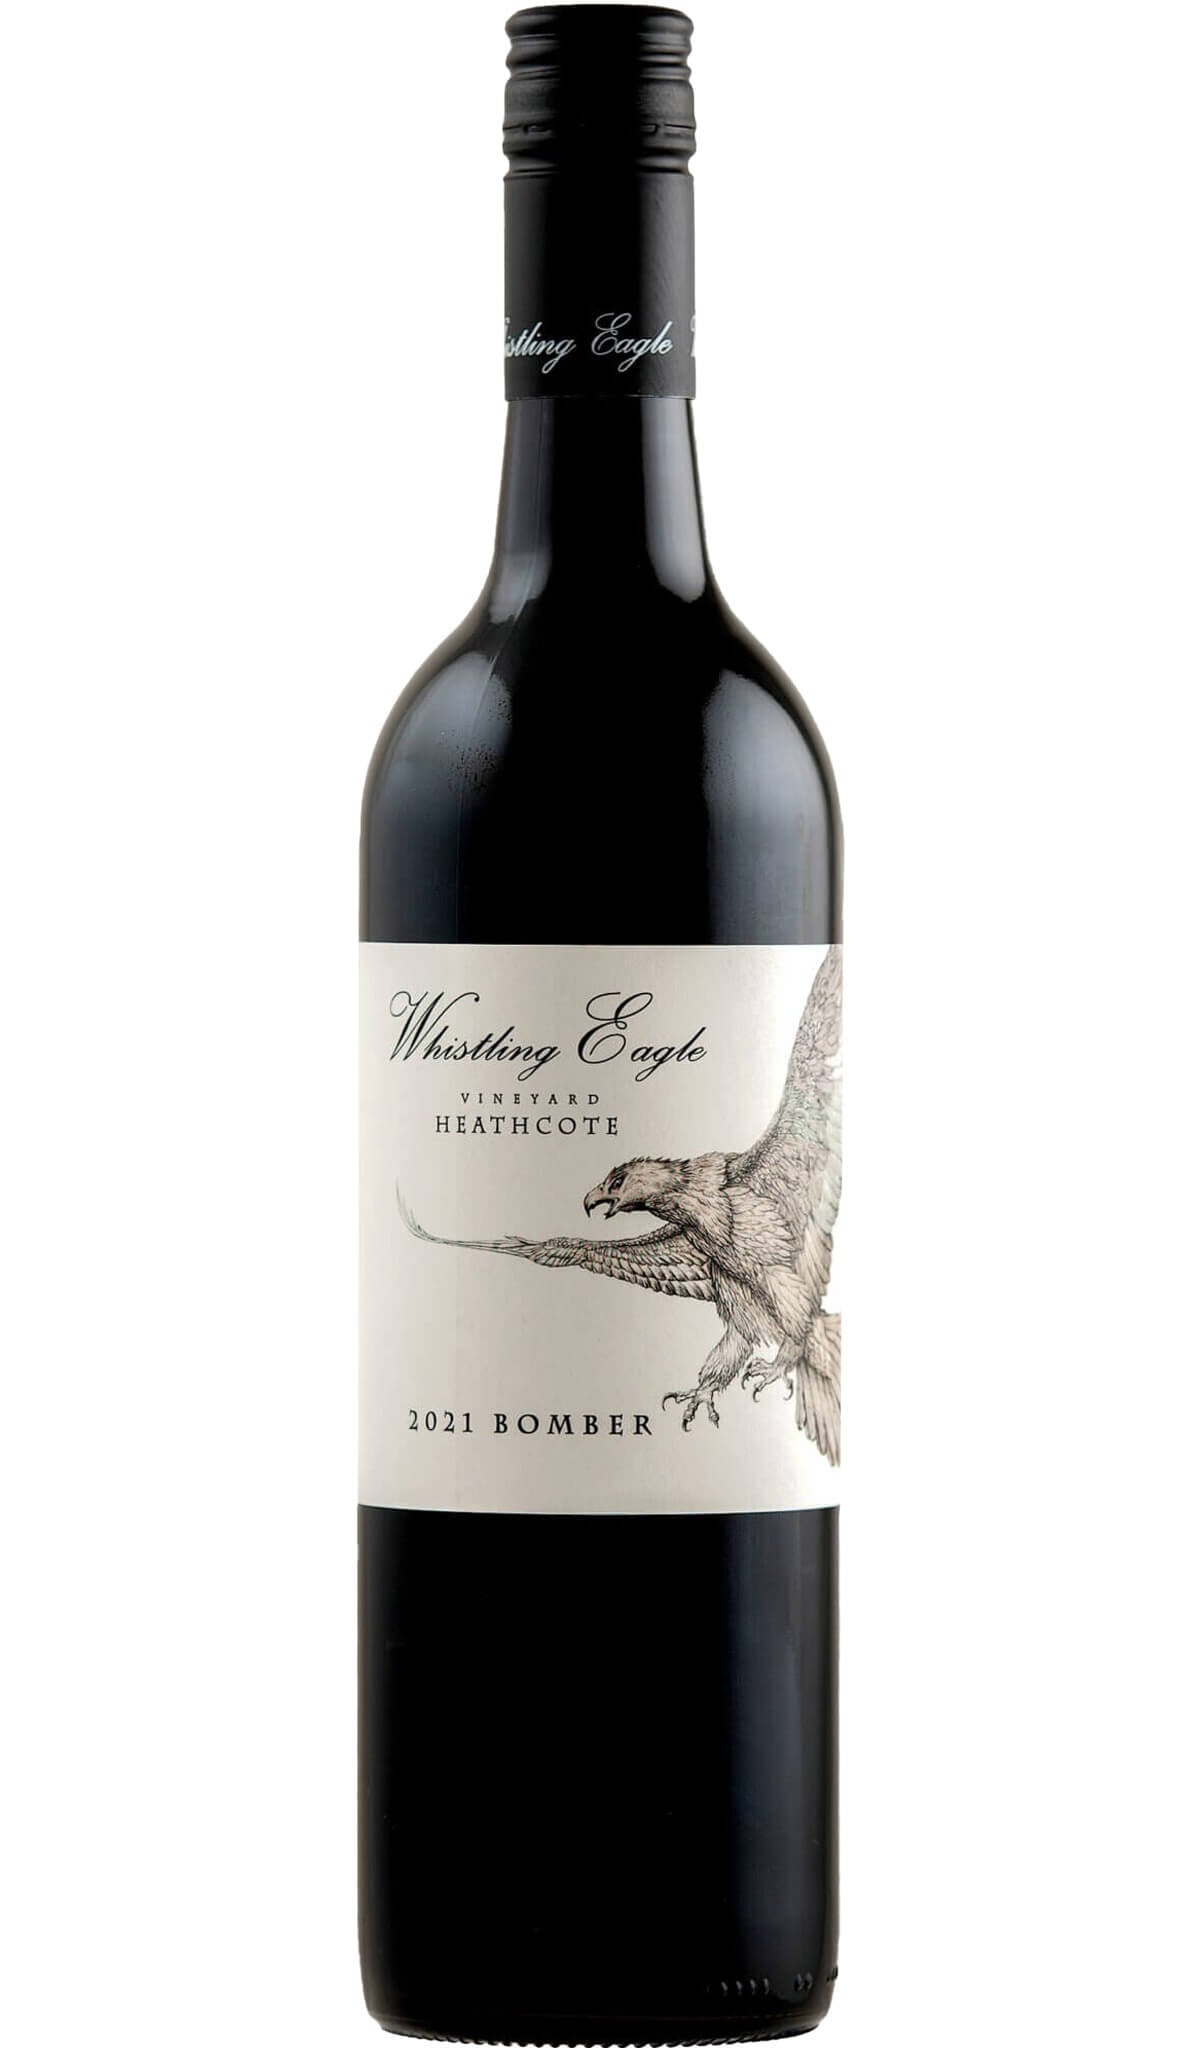 Find out more, explore the range and buy Whistling Eagle Bomber 2021 (Heathcote) available online at Wine Sellers Direct - Australia's independent liquor specialists.